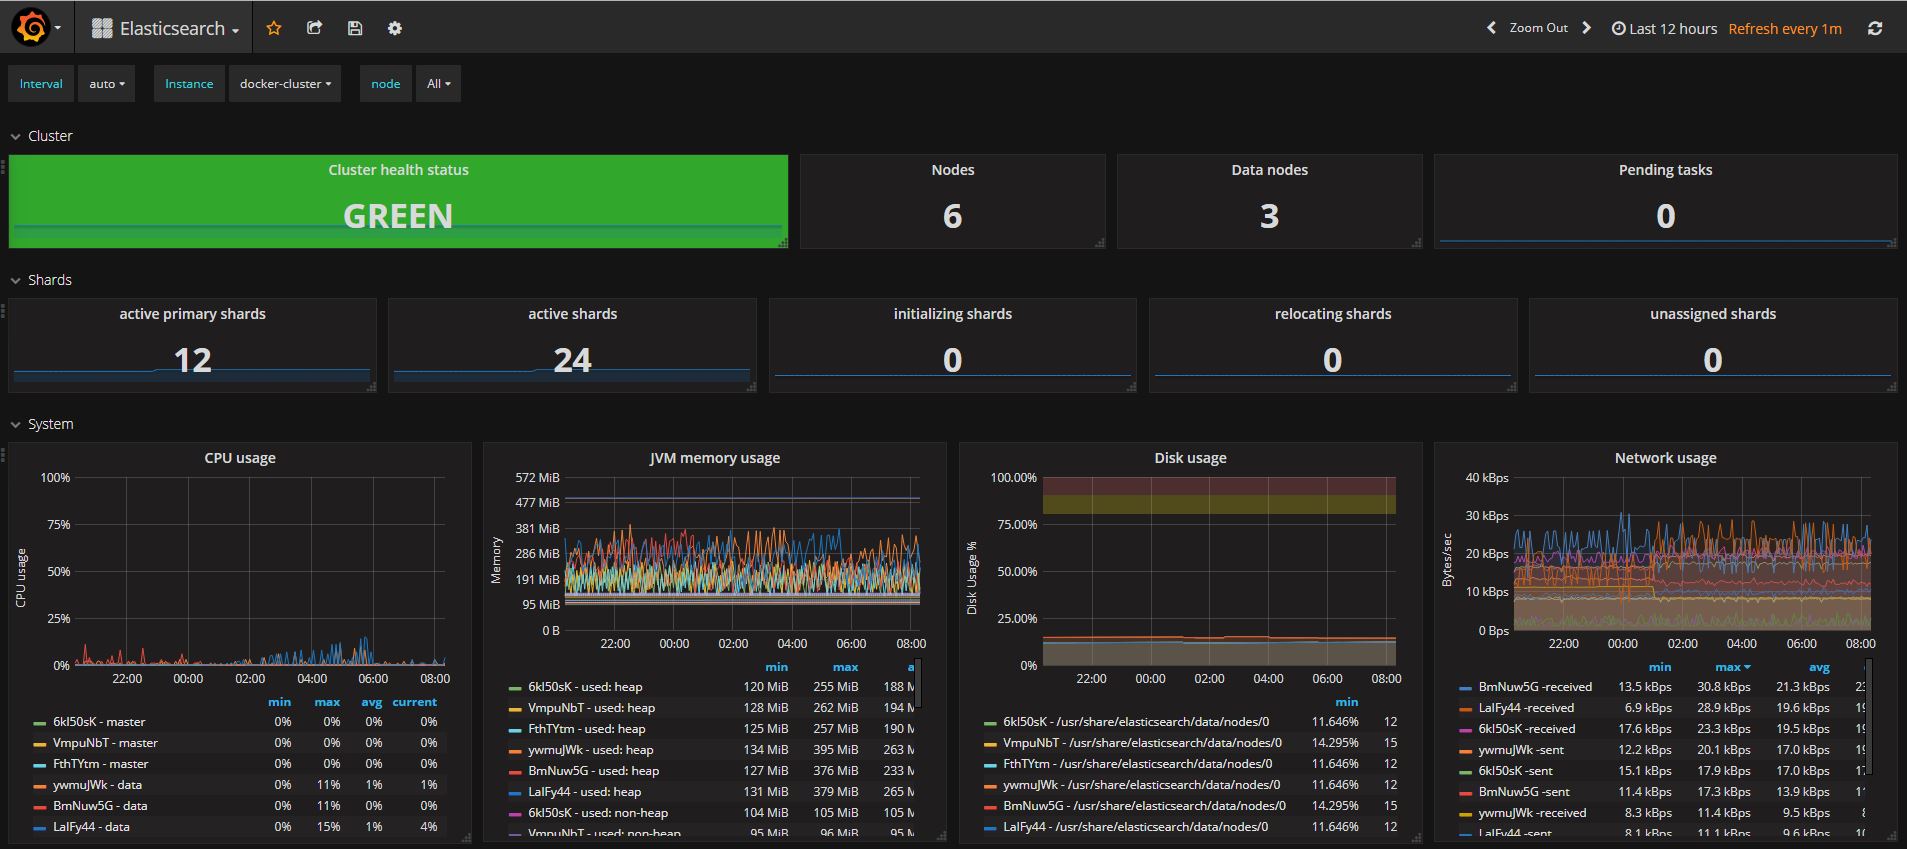 Dashboard showing various graphs and metrics including shard use, CPU usage, and network usage